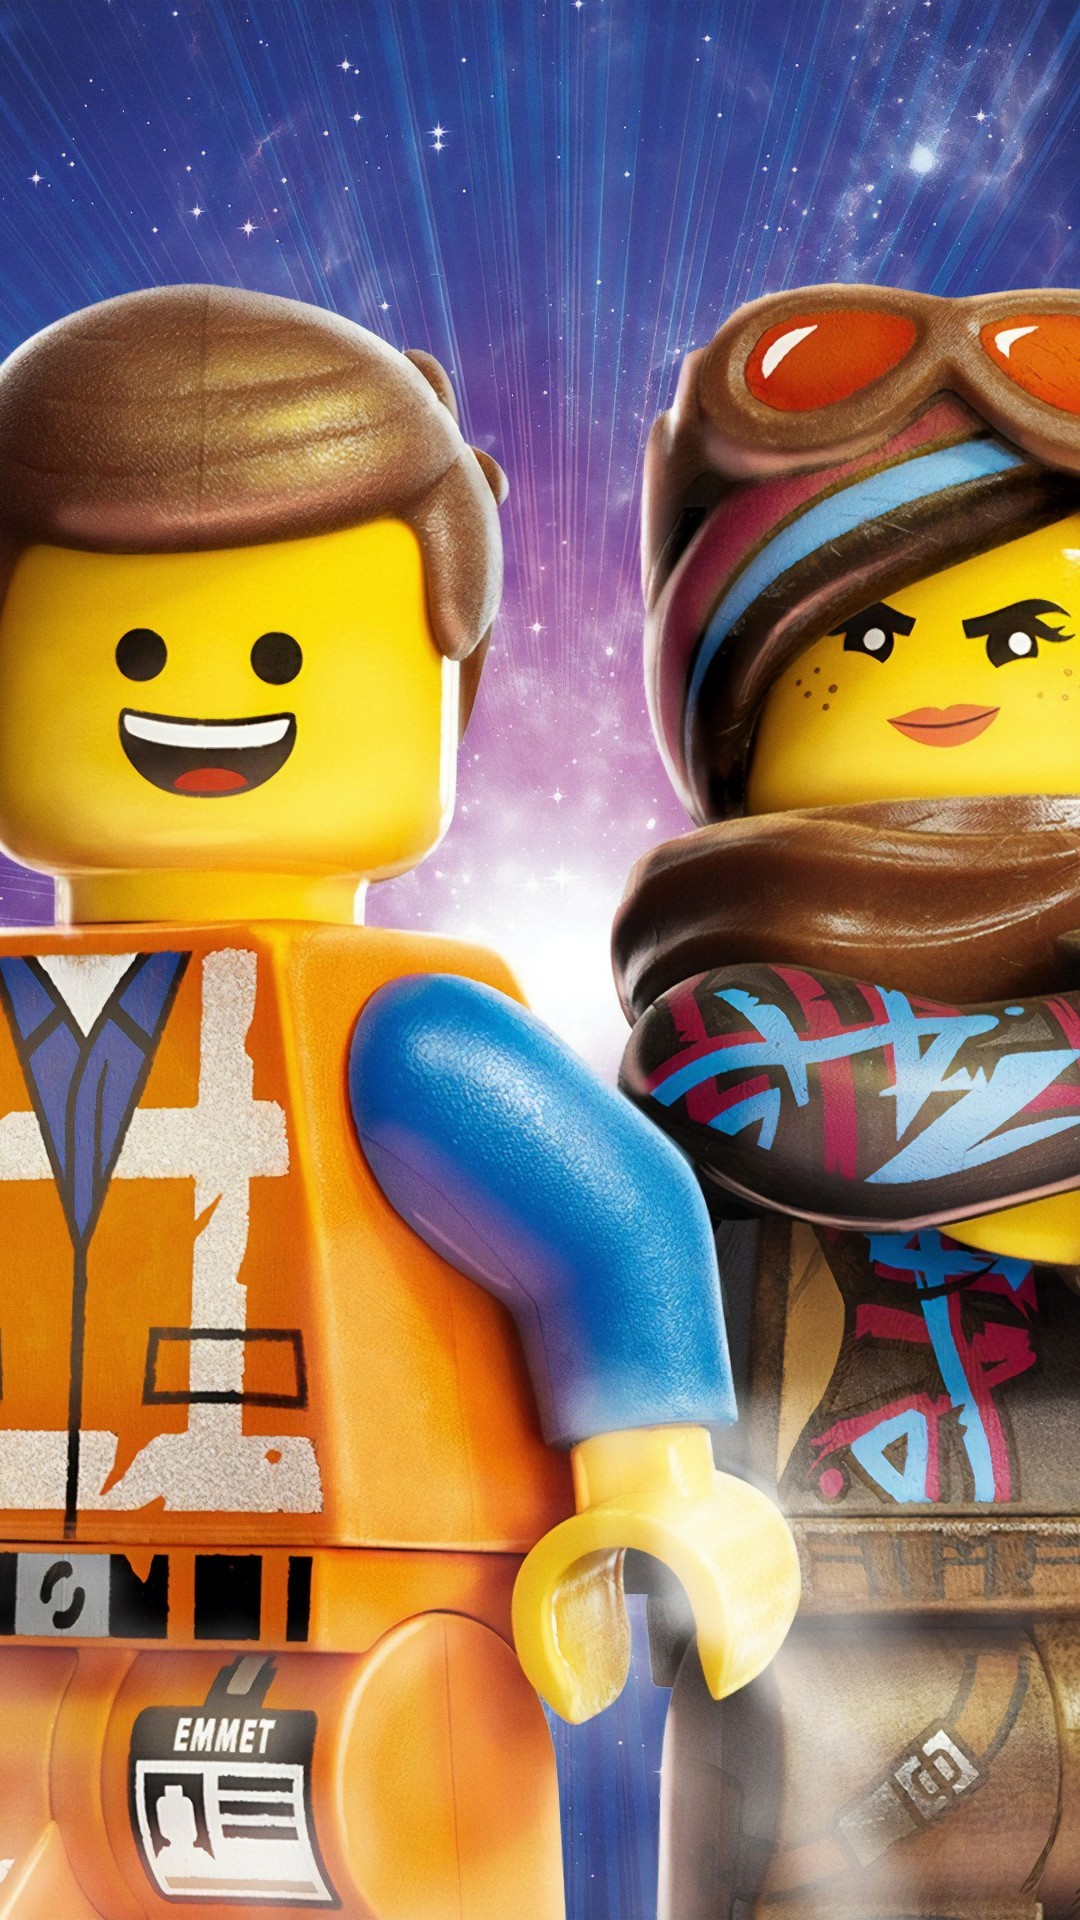 The Lego Movie - Lego Movie 2 Emmet And Wyldstyle - HD Wallpaper 